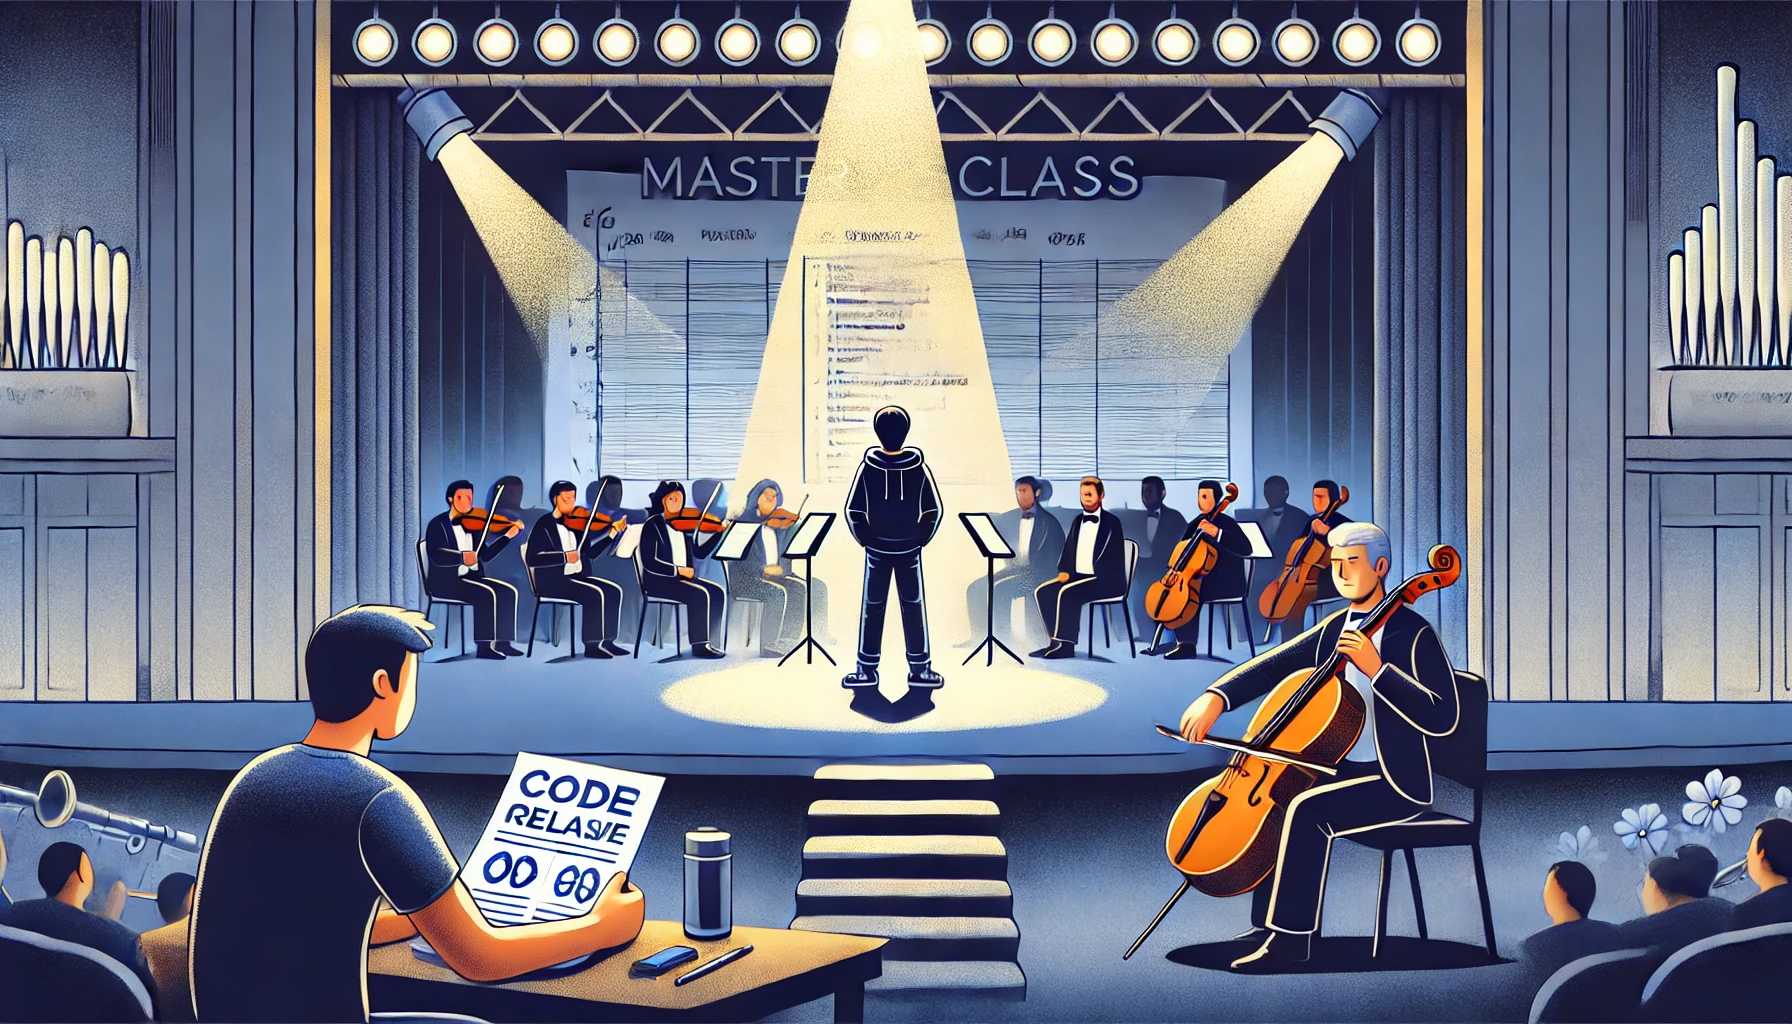 From Stage Fright to the Symphony: The Master Class and Code Review Anxiety